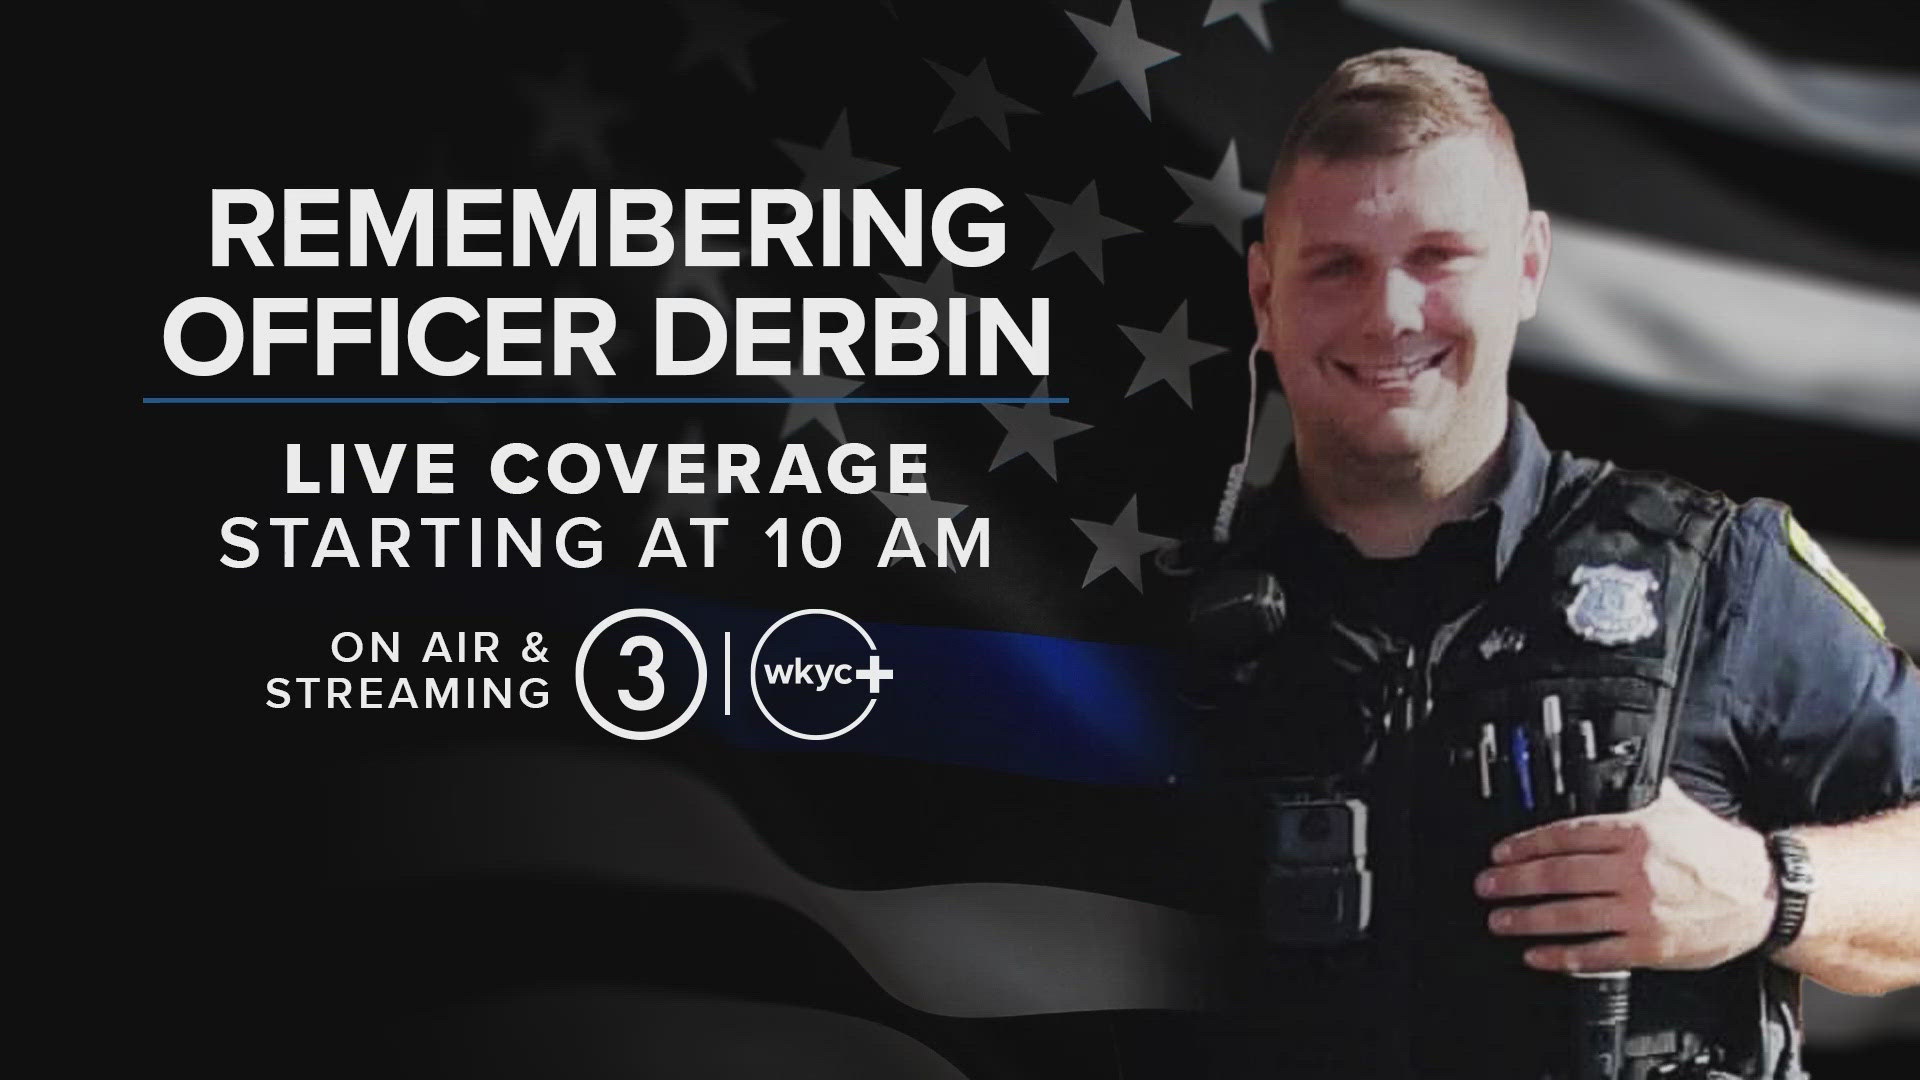 Funeral services begin today for Euclid police officer Jacob Derbin who was shot and killed in the line of duty while responding to a call last Saturday.